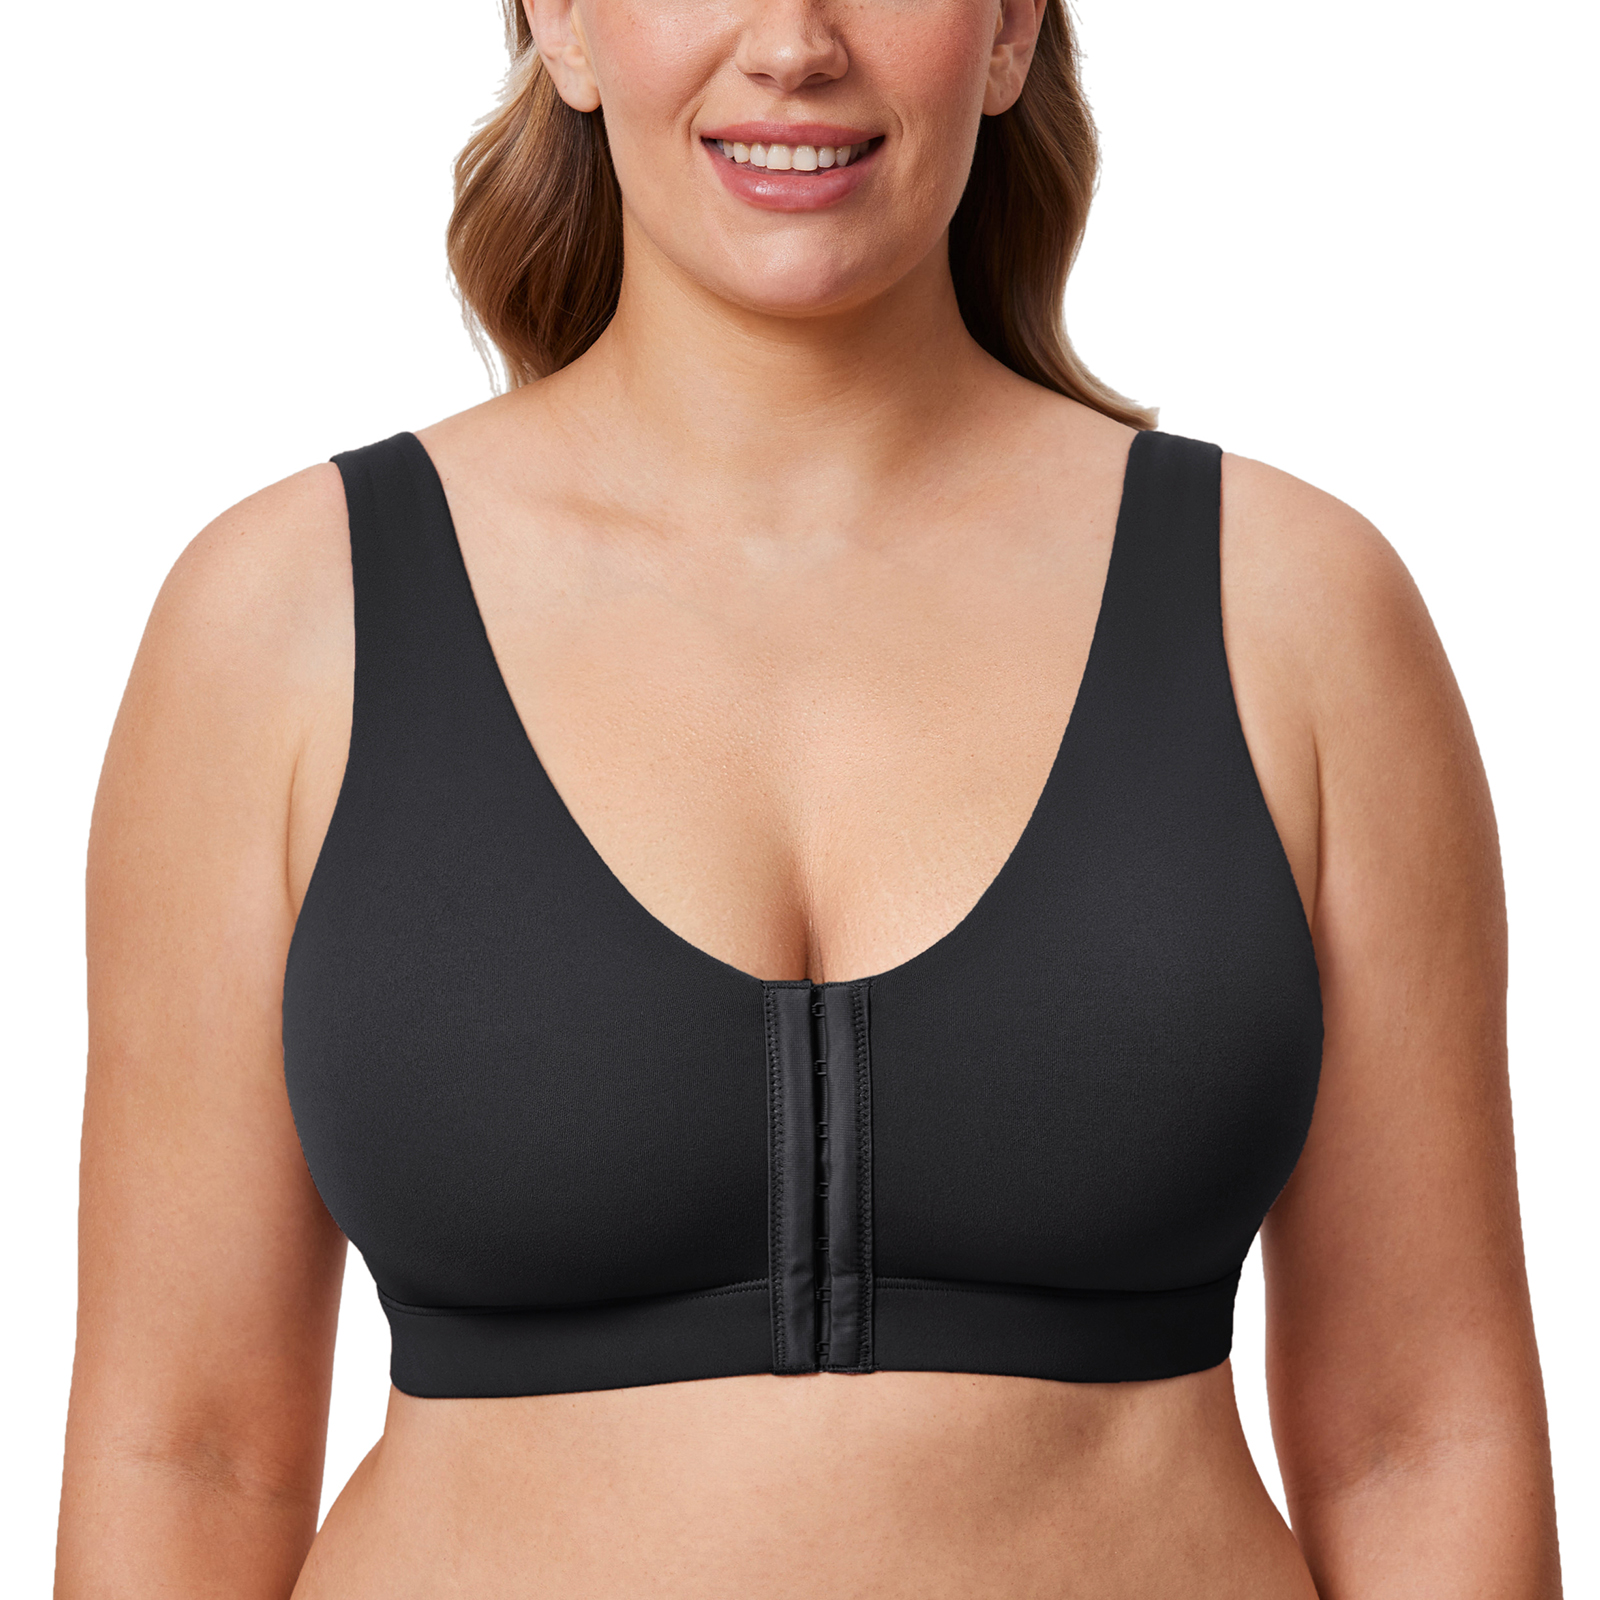 AISILIN Women's Front Fastening Plus Size Seamless Unlined